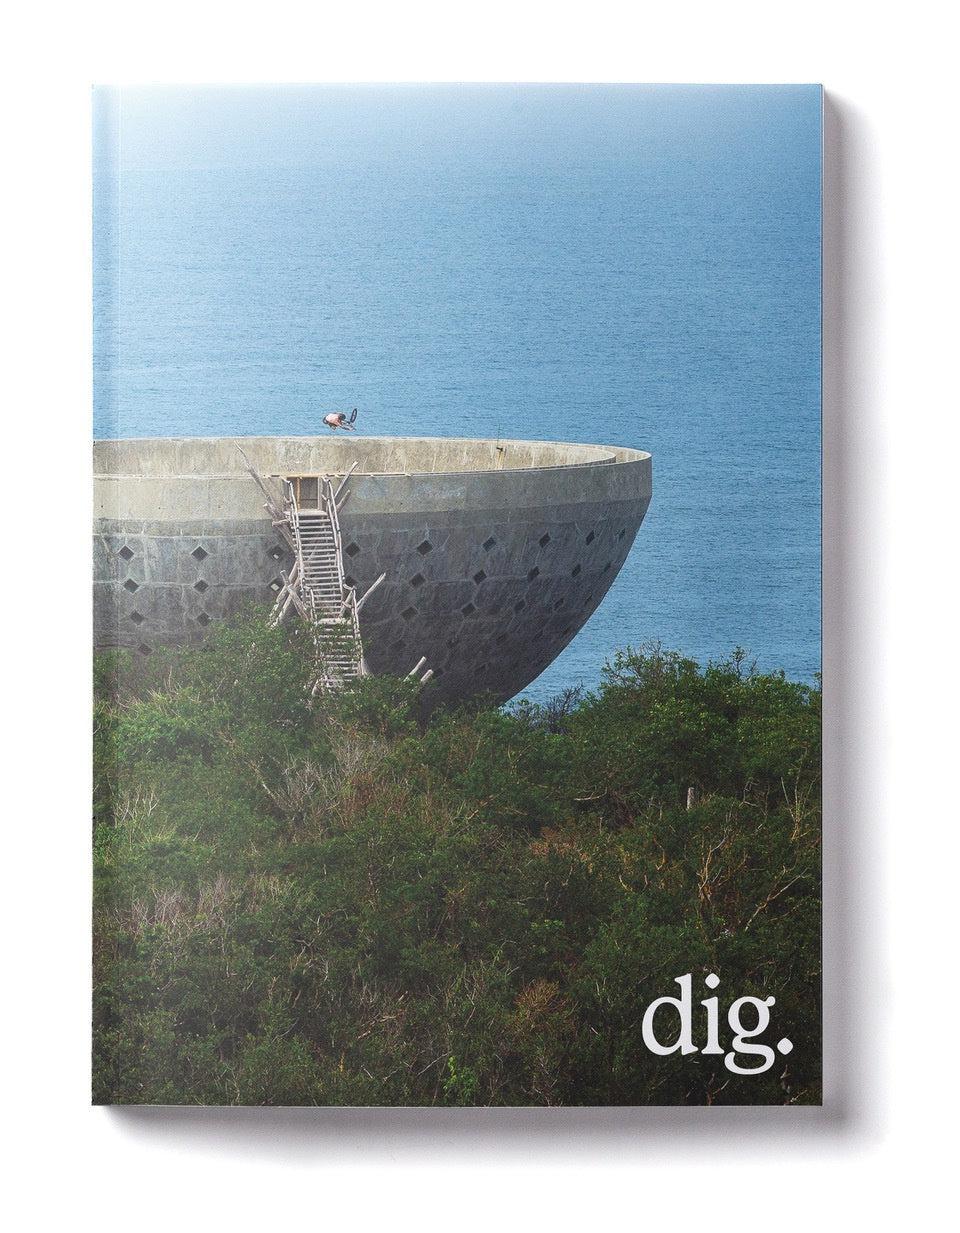 The cover of DIG Book 2023 - Photo Annual, a photo annual/collector's edition, featuring a large bowl in the background captured by a talented BMX photographer.